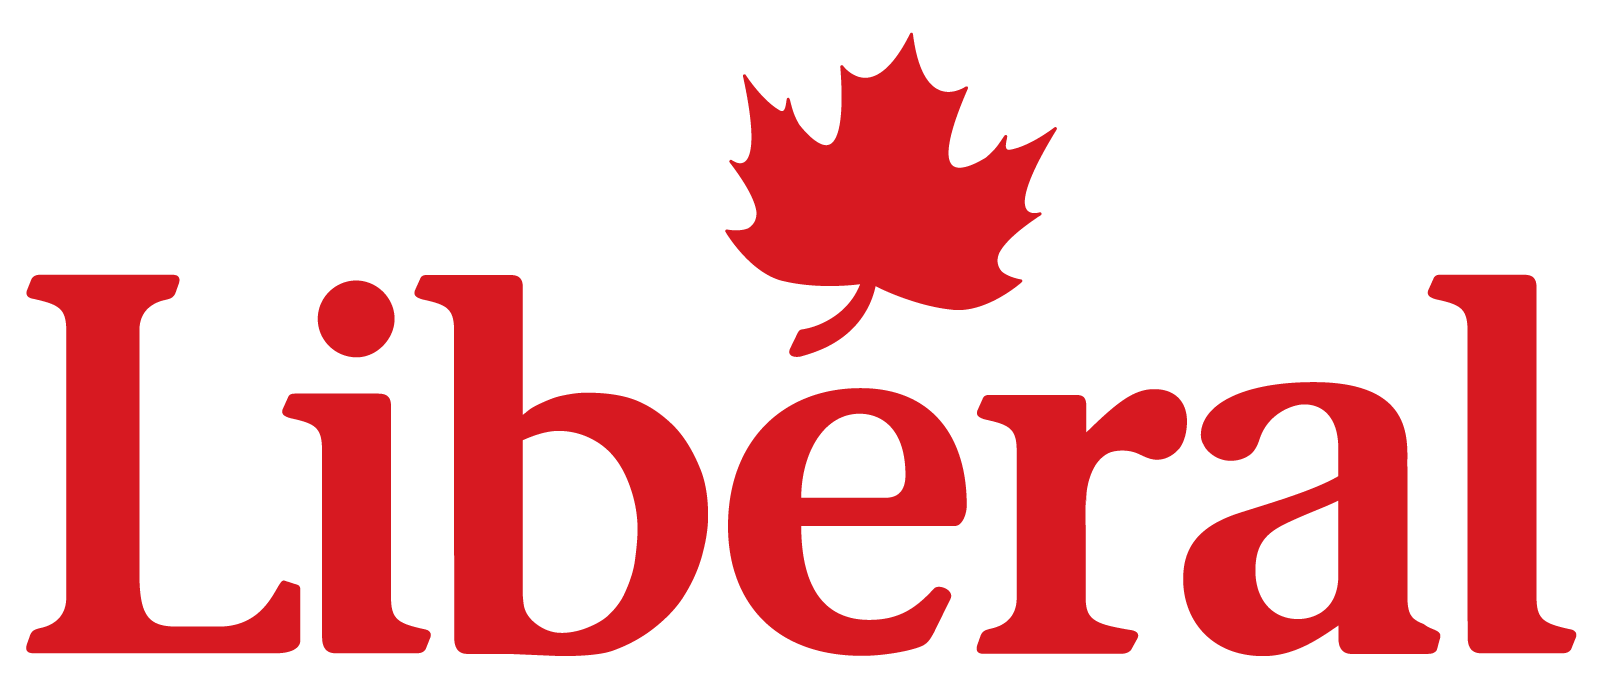 Logos & Graphics | Liberal Party of Canada